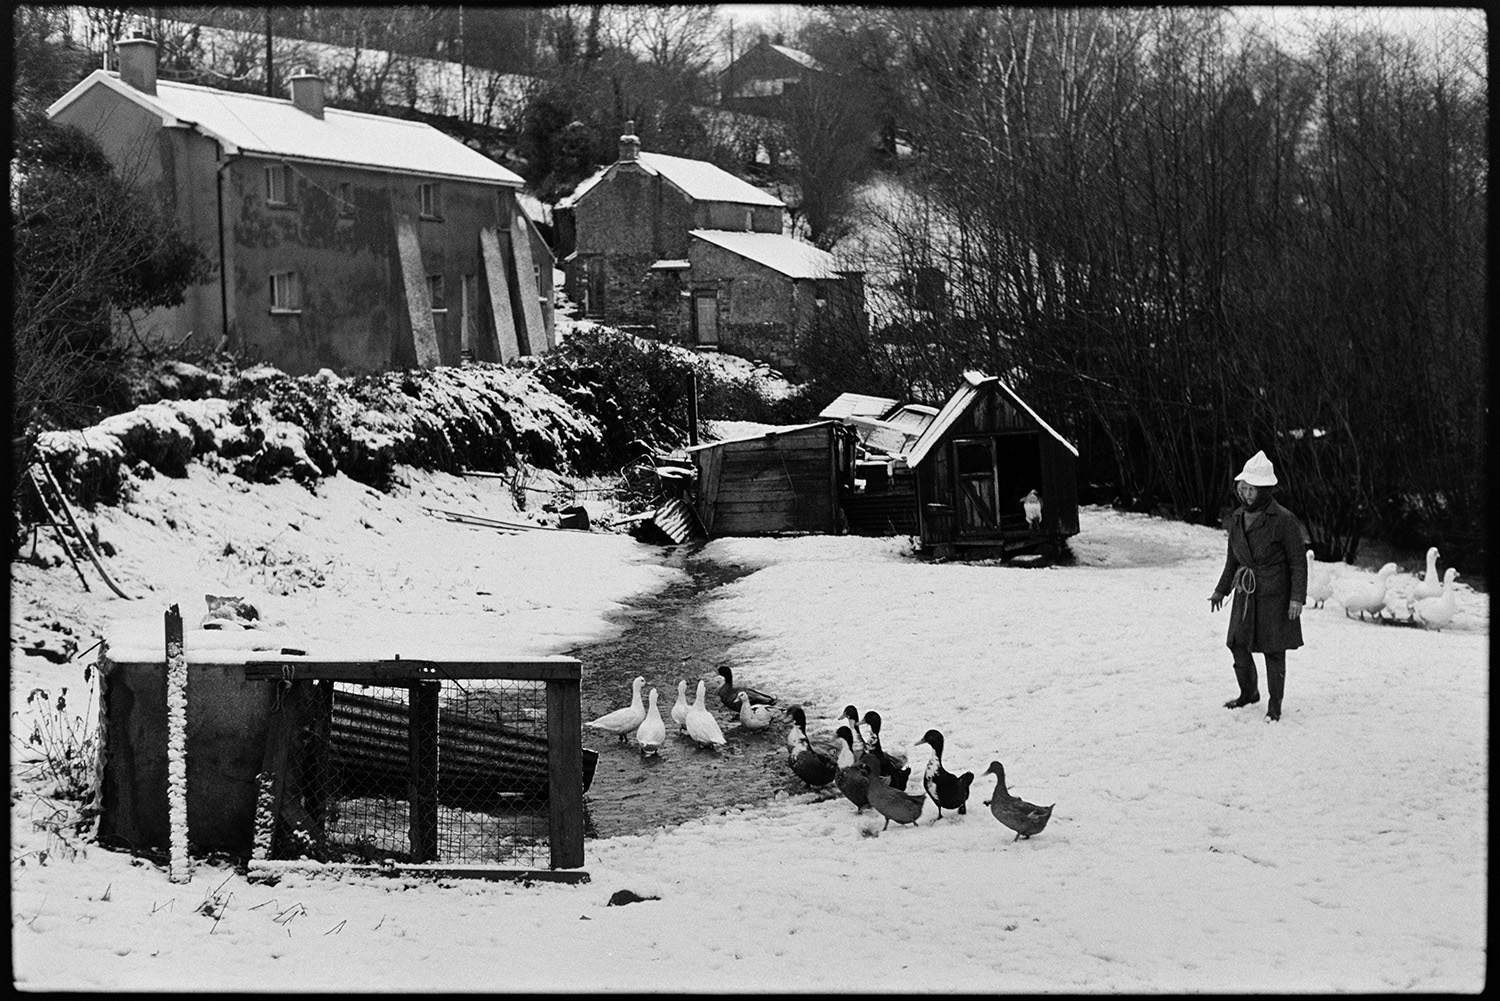 Snow. Woman farmer with ducks and chickens.
[Jo Curzon rounding up poultry in a snow covered field behind the cottages at Millhams, Dolton. Various wooden sheds can also be seen in the field.]